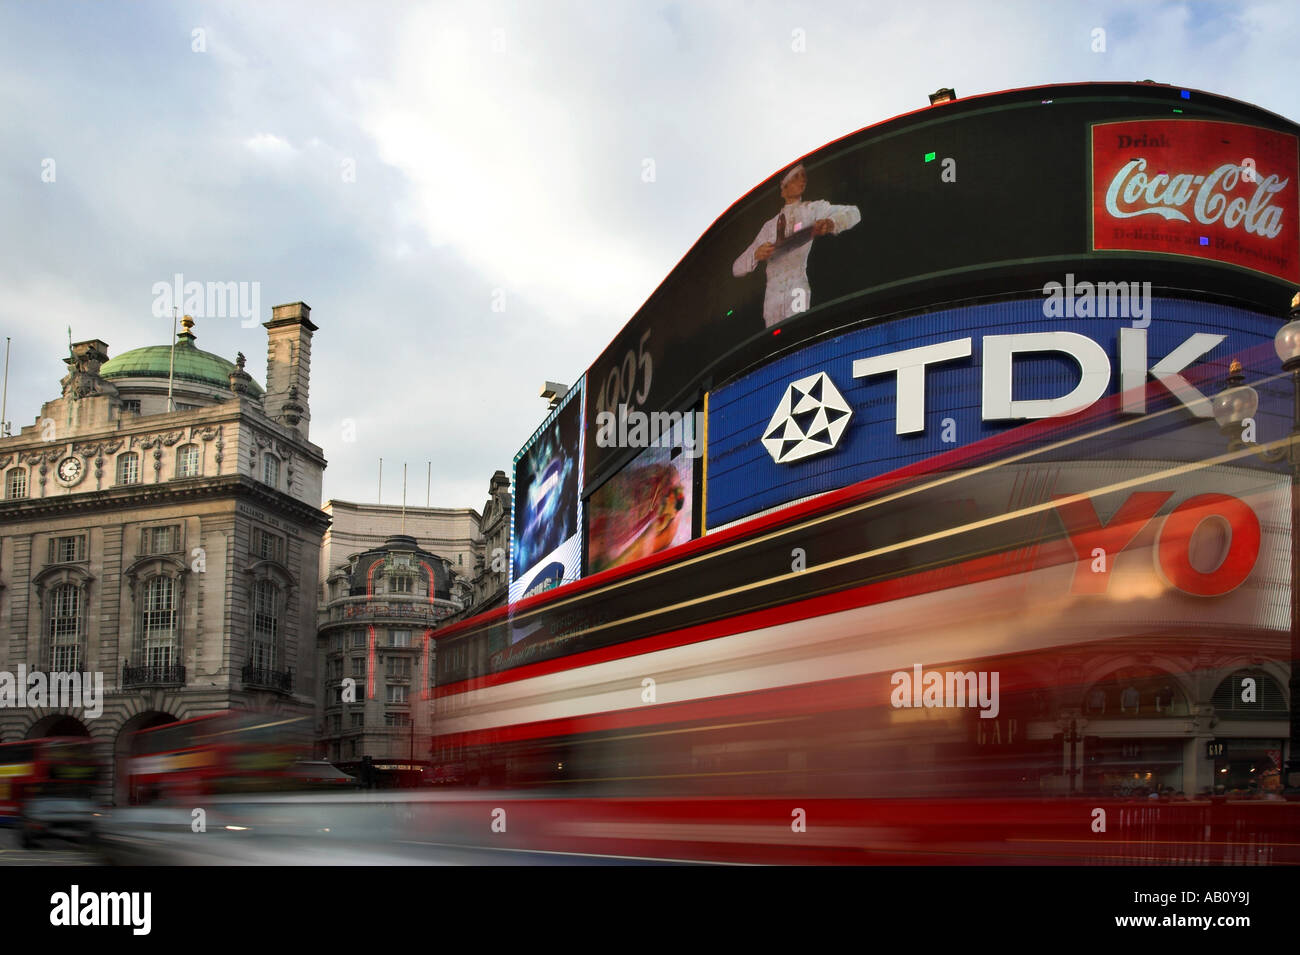 Picadilly Circus, London with bright billboards and red double decker bus blurred in foreground. Stock Photo